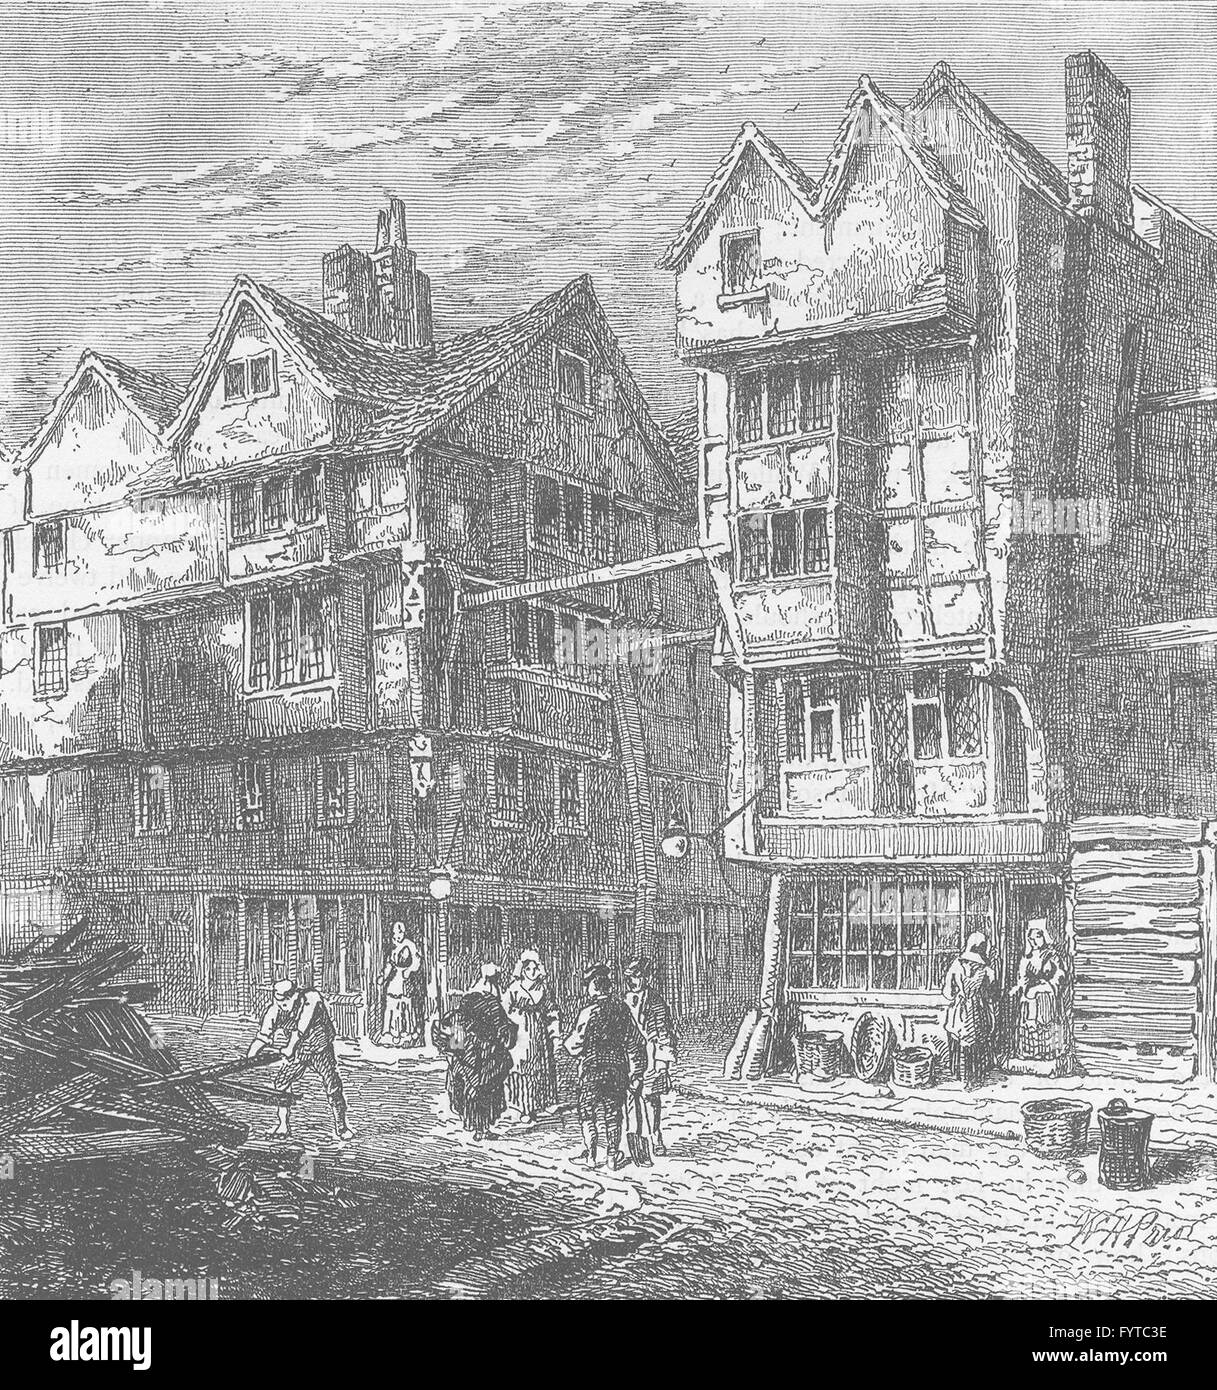 ALDWYCH: Old Houses formerly standing in Butcher's Row, c1800. London, c1880 Stock Photo